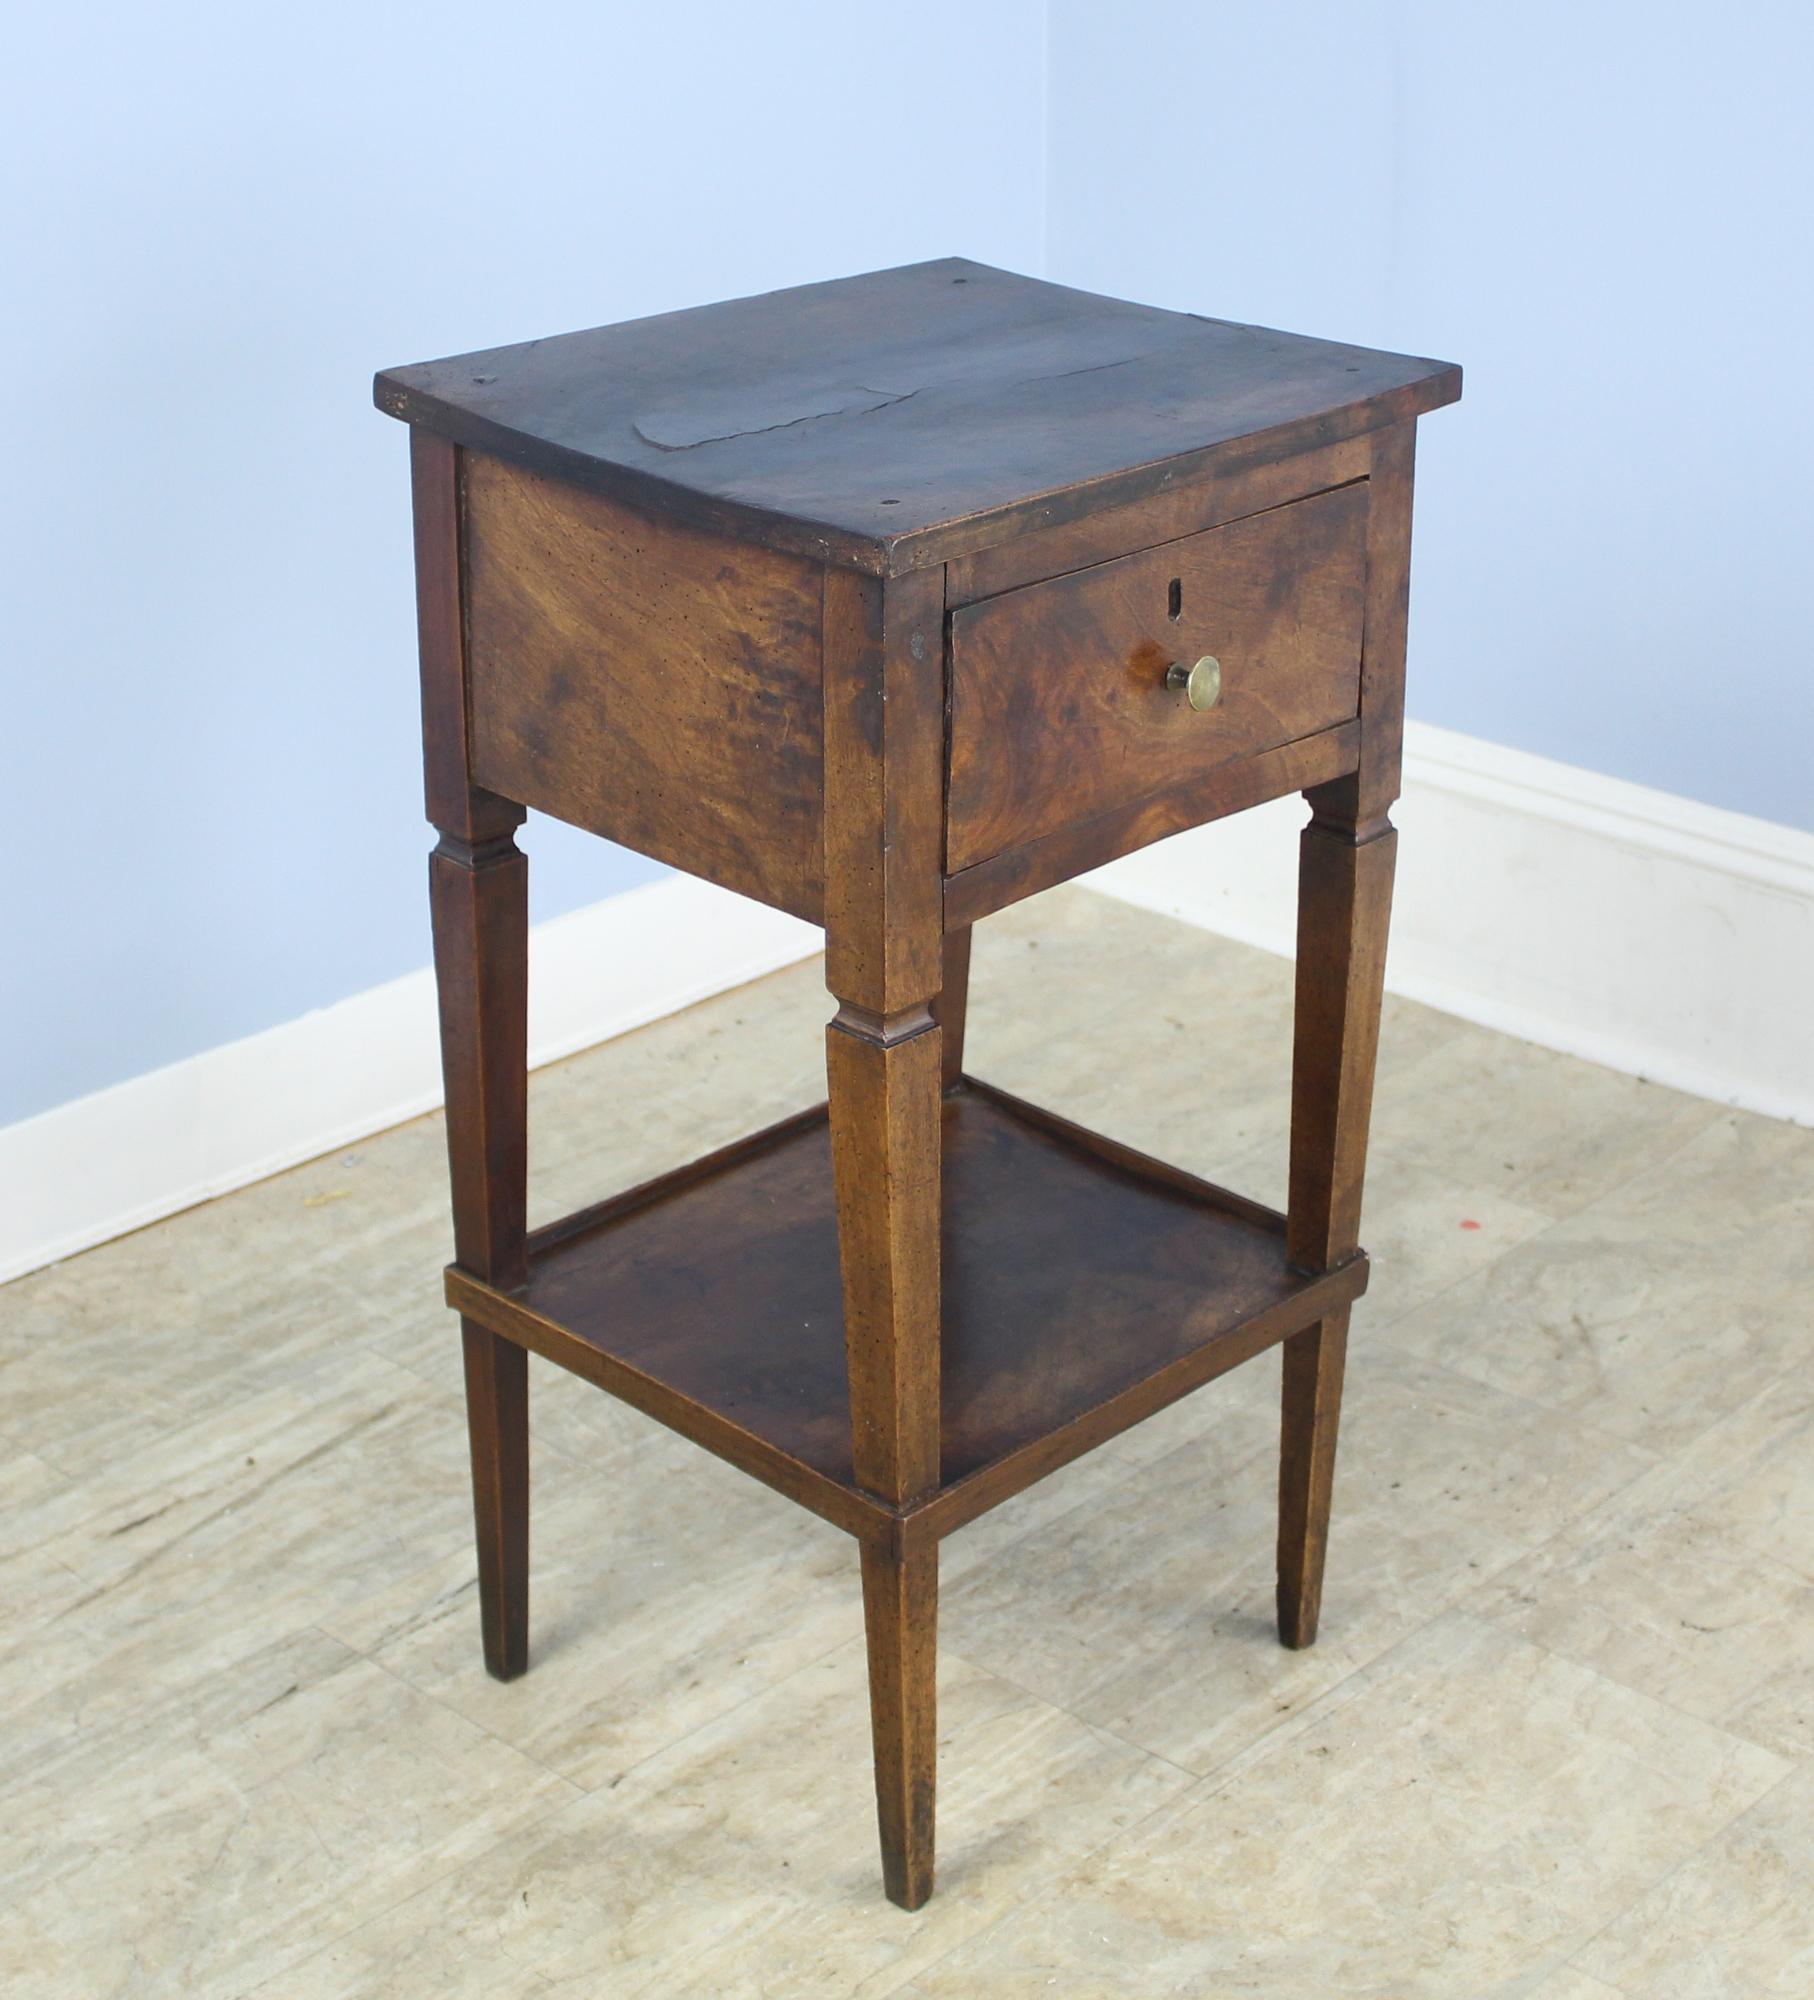 A lovely occasional table in dark patinated walnut. The top shelf is thick and has lovely walnut grain with a slight bow. The lower shelf adds a decorative element, and has little galleries to keep items from slipping off. Some distress and a